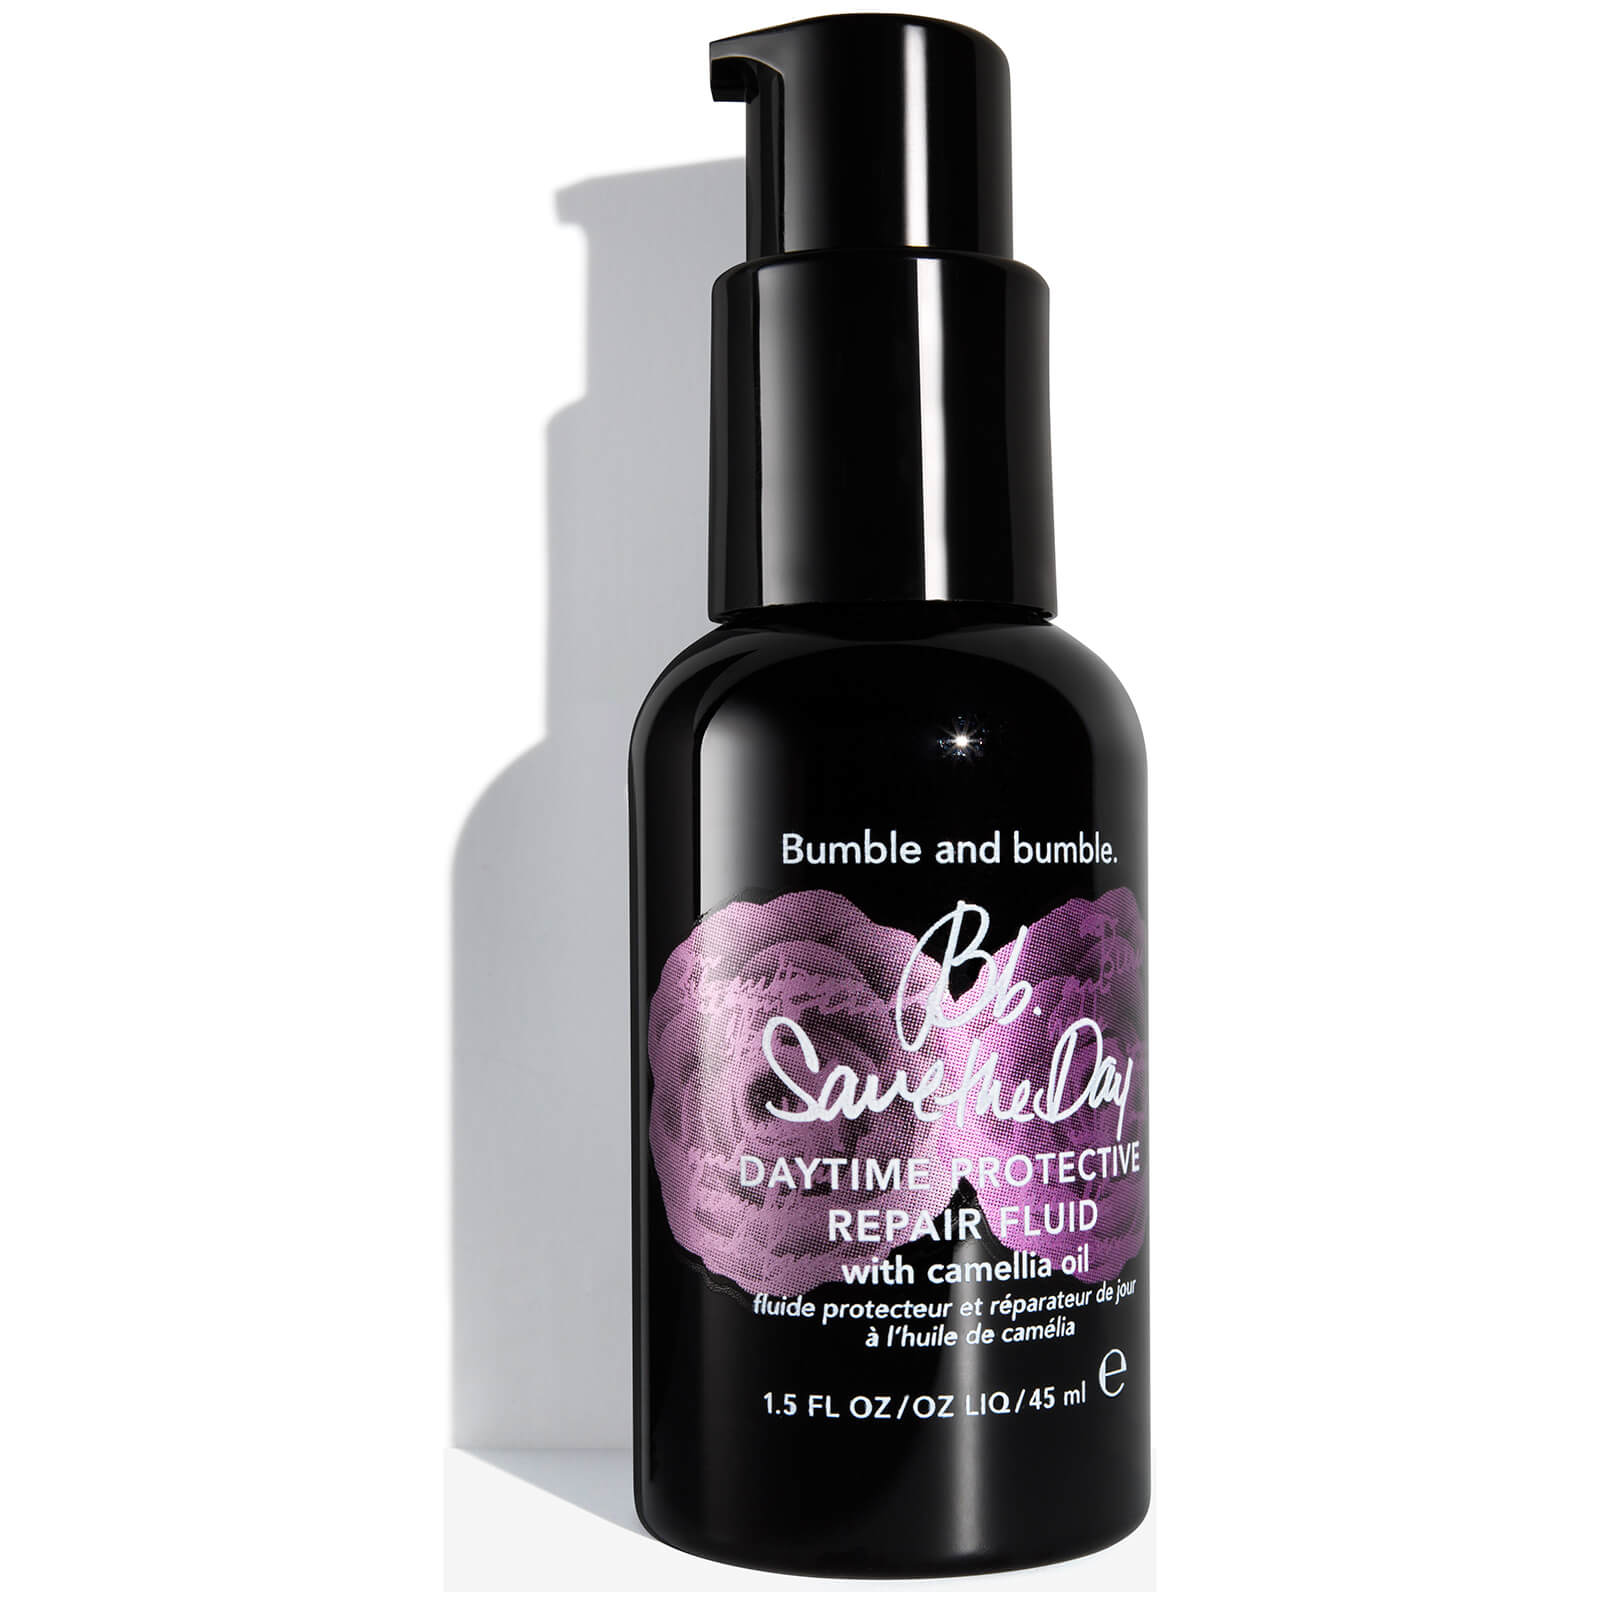 Bumble and bumble Save the Day - Daytime Protective Repair Fluid 45ml